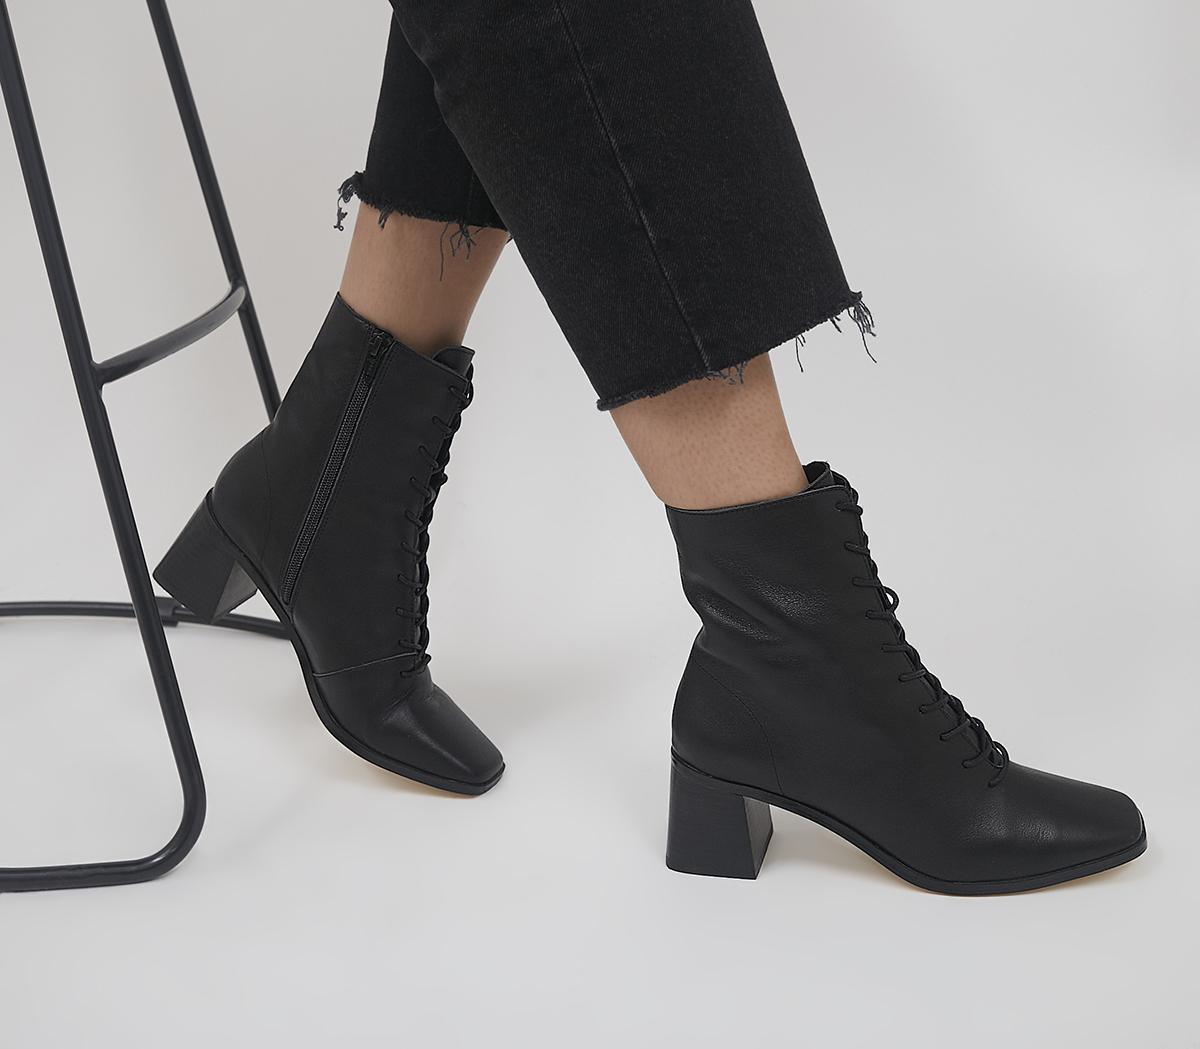 Winter Faux Suede Ankle Boots For Women Round, Plus Size Casual Shoes With Low  Heels Chelsea Style Womens Winter Dress Boots Style #231108 From Qiyuan09,  $25.18 | DHgate.Com